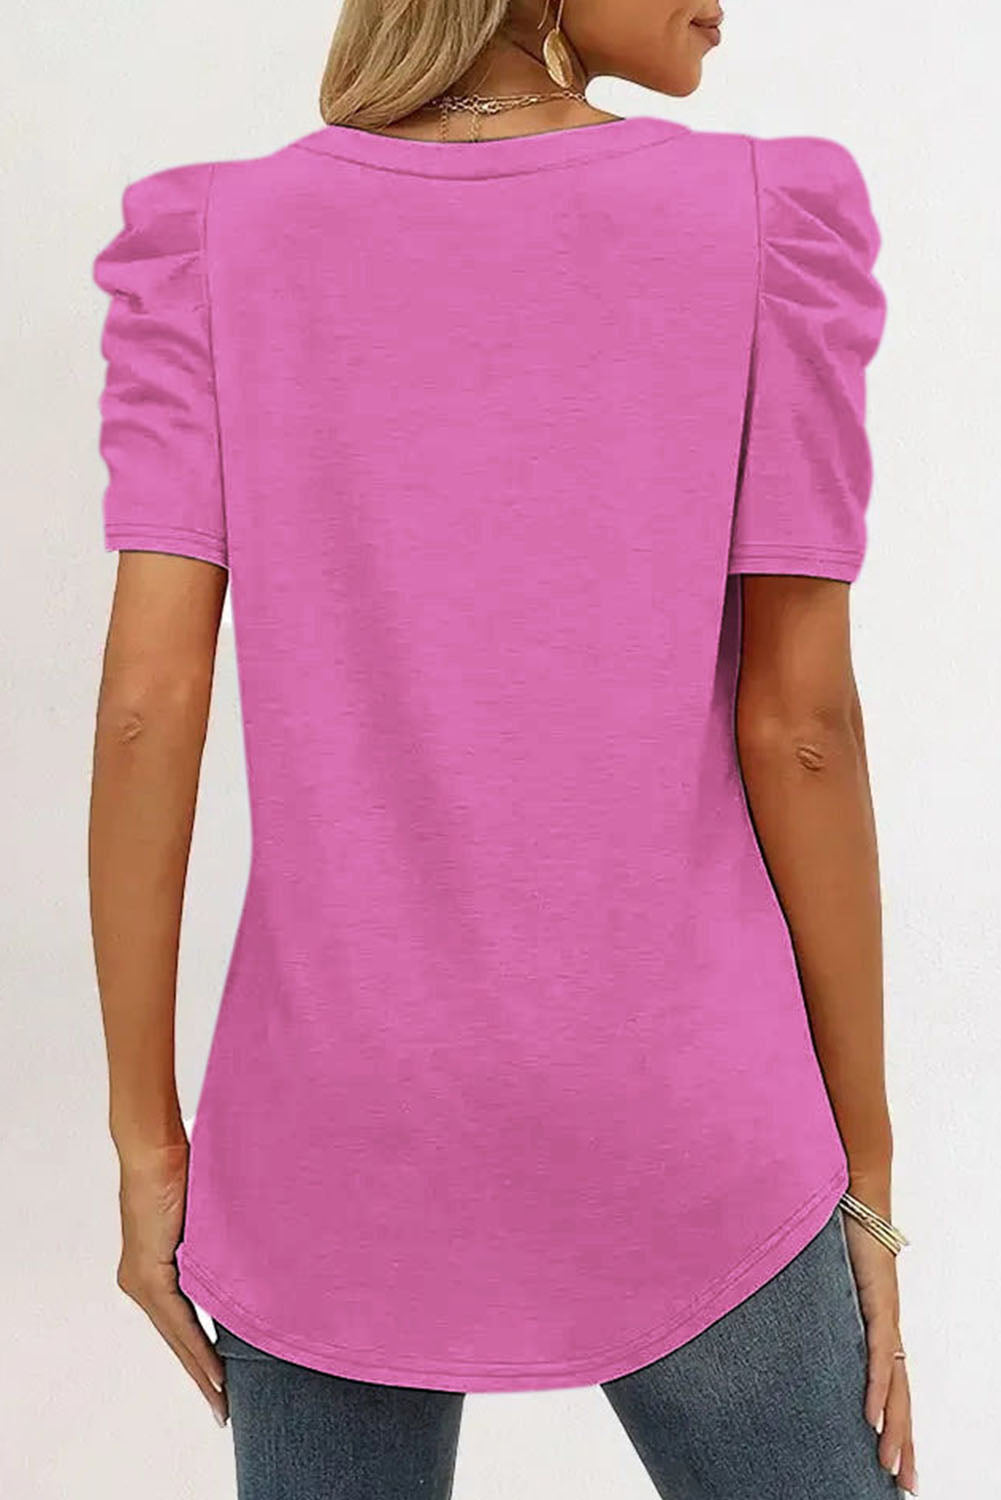 White Puff Sleeve Casual V Neck T-Shirt